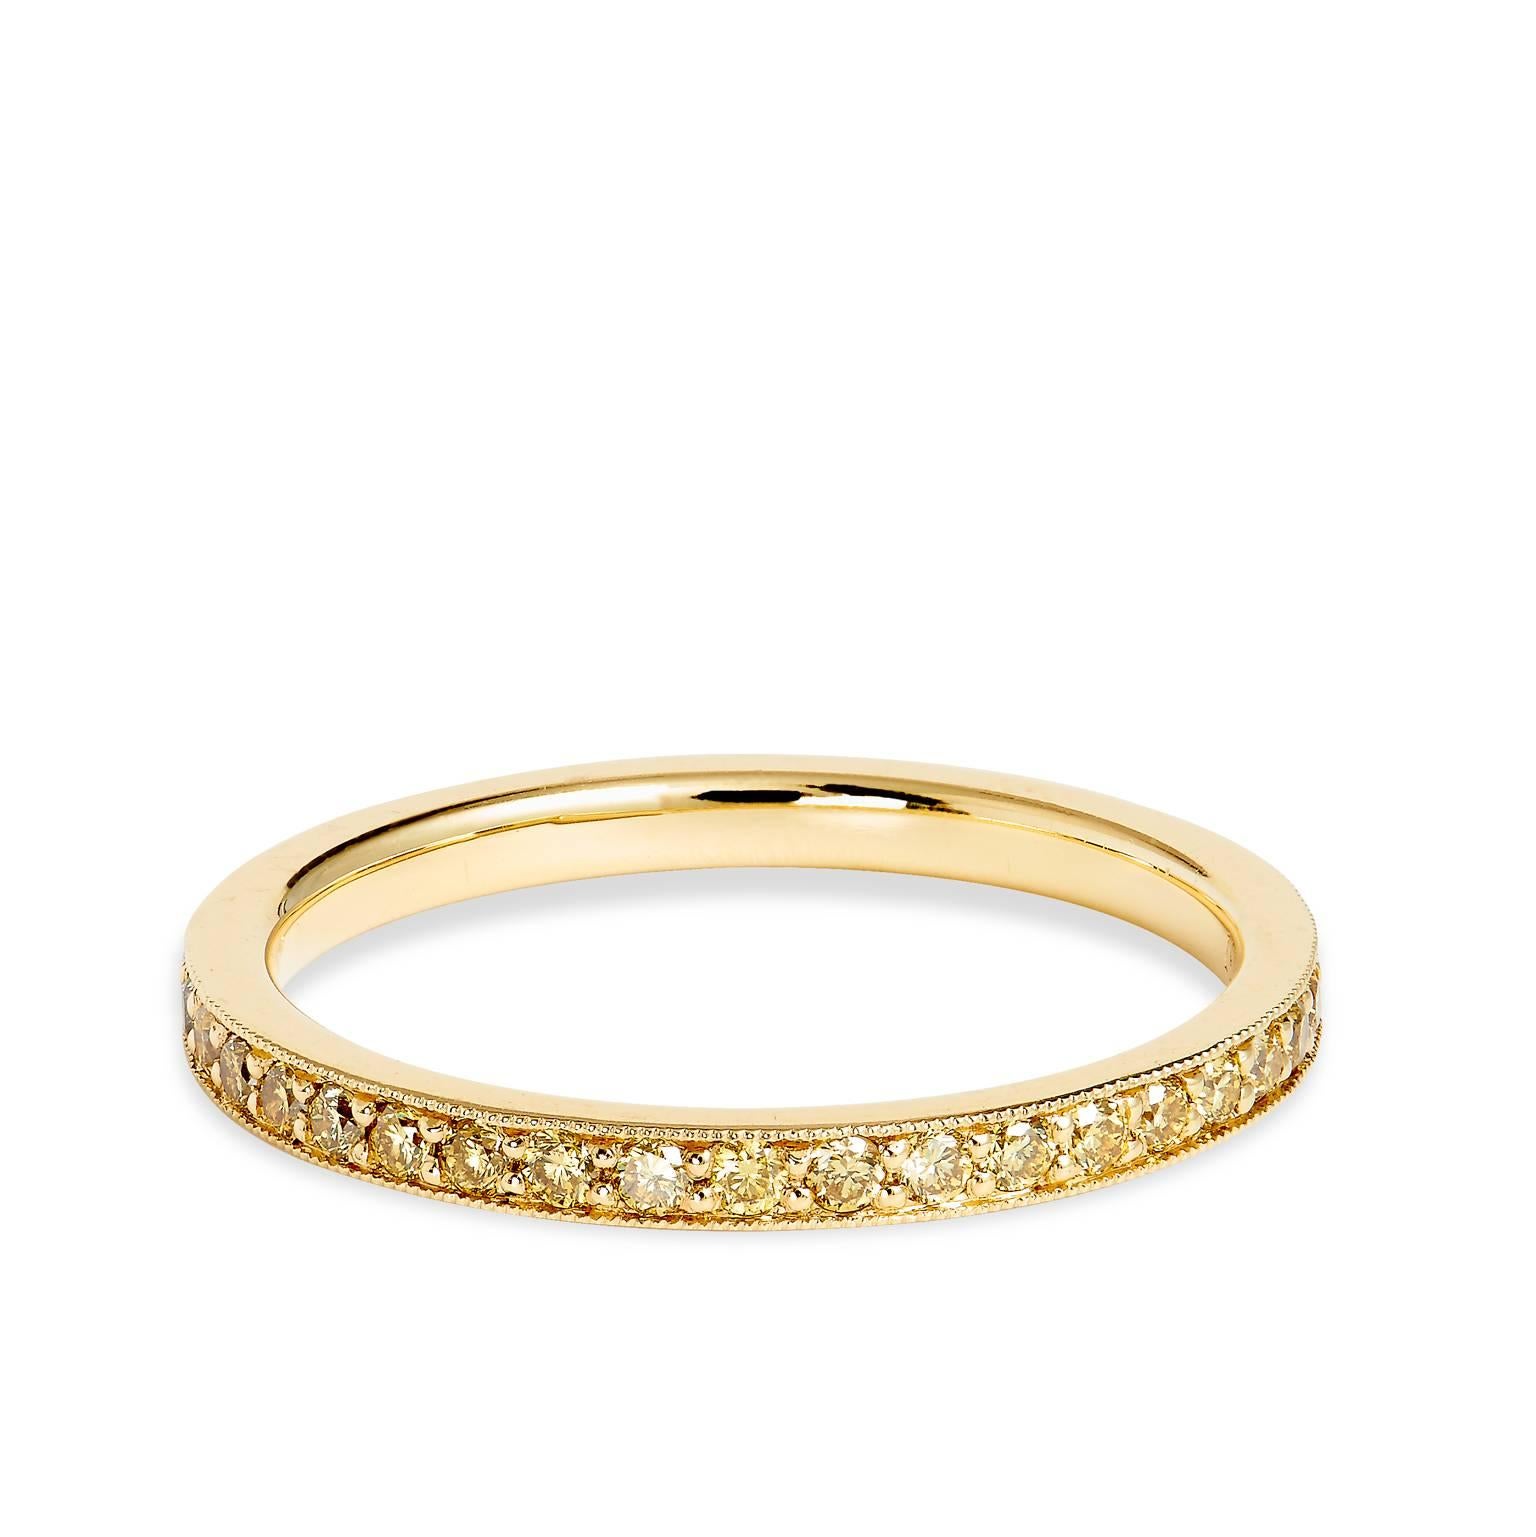 This eternity band is crafted in 18kt yellow gold with .50cts of yellow diamonds. It displays beautiful milgrain detail upon the edges of the band. It looks stunning paired with an engagement ring or even stacked with multiple bands. We have this